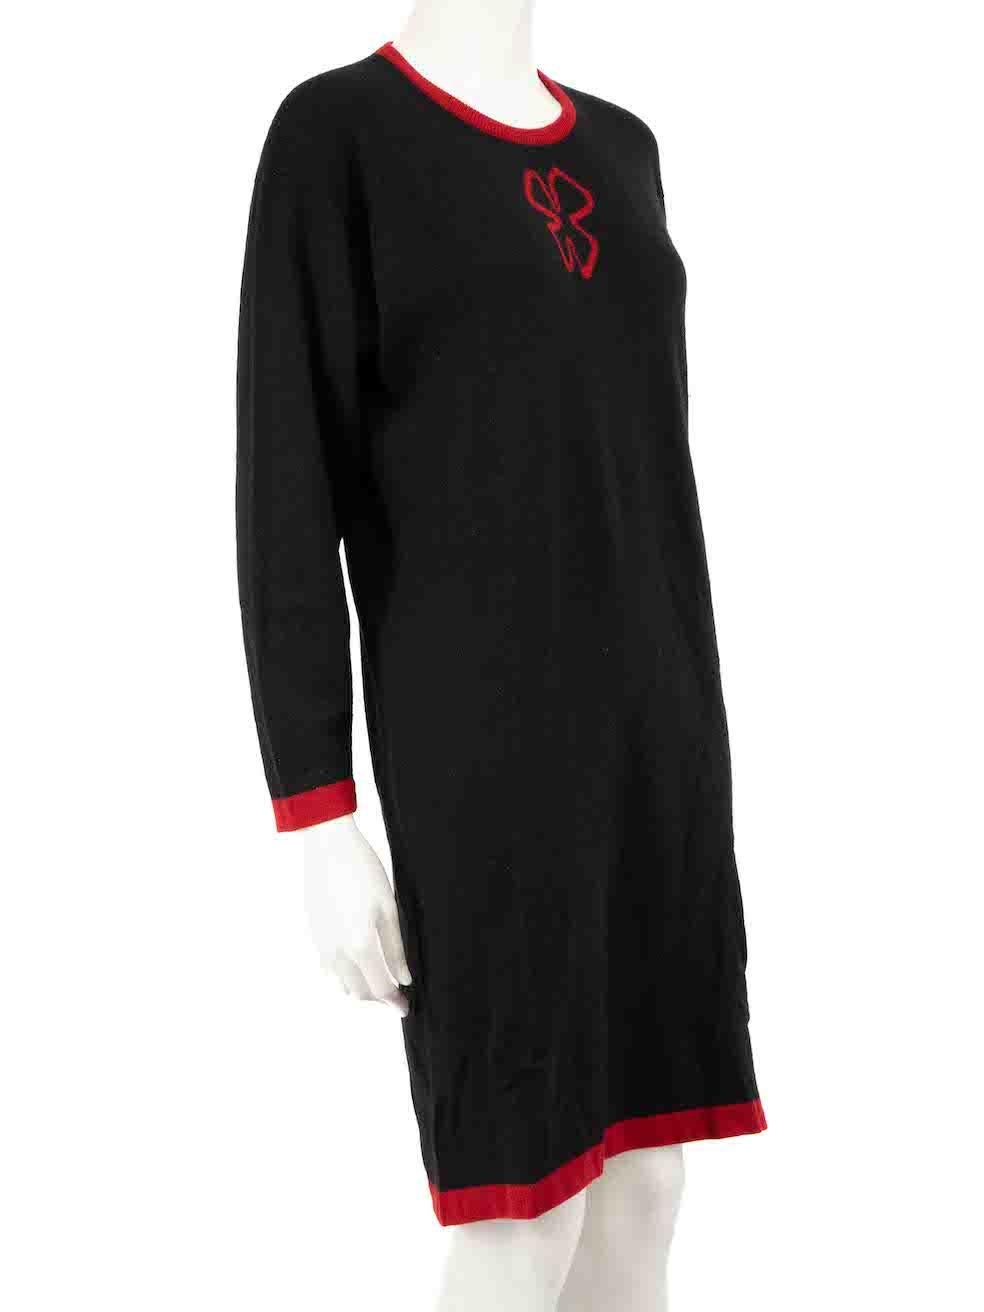 CONDITION is Very good. Minimal wear to dress is evident. Minimal wear to the knit composition with light pilling throughout on this used Jean Muir designer resale item.
 
 
 
 Details
 
 
 Vintage
 
 Black
 
 Cashmere
 
 Knit dress
 
 Long sleeves
